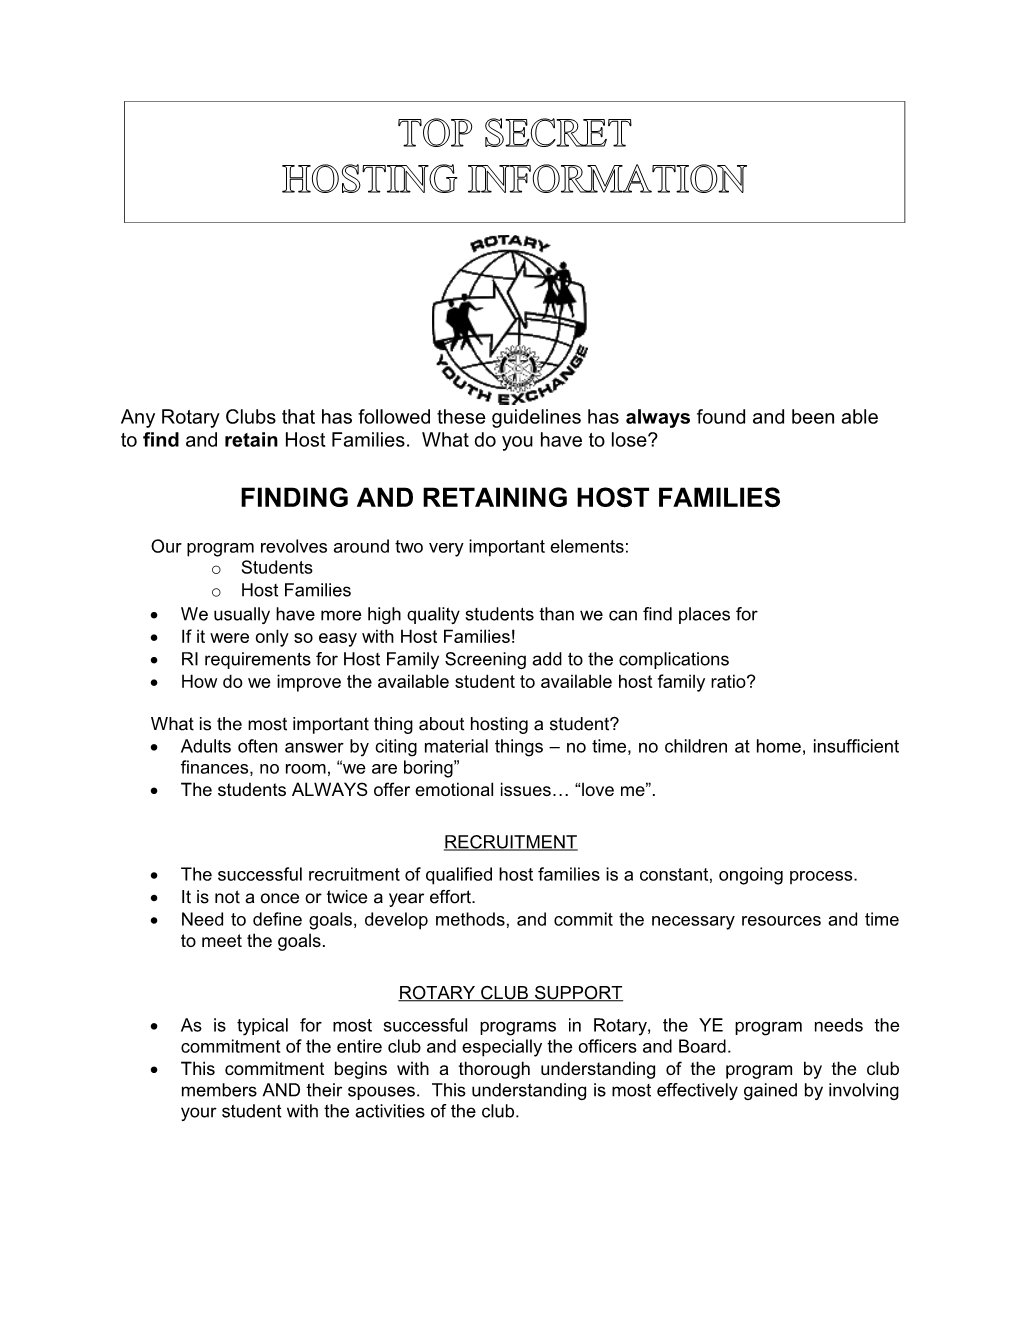 Finding and Retaining Host Families